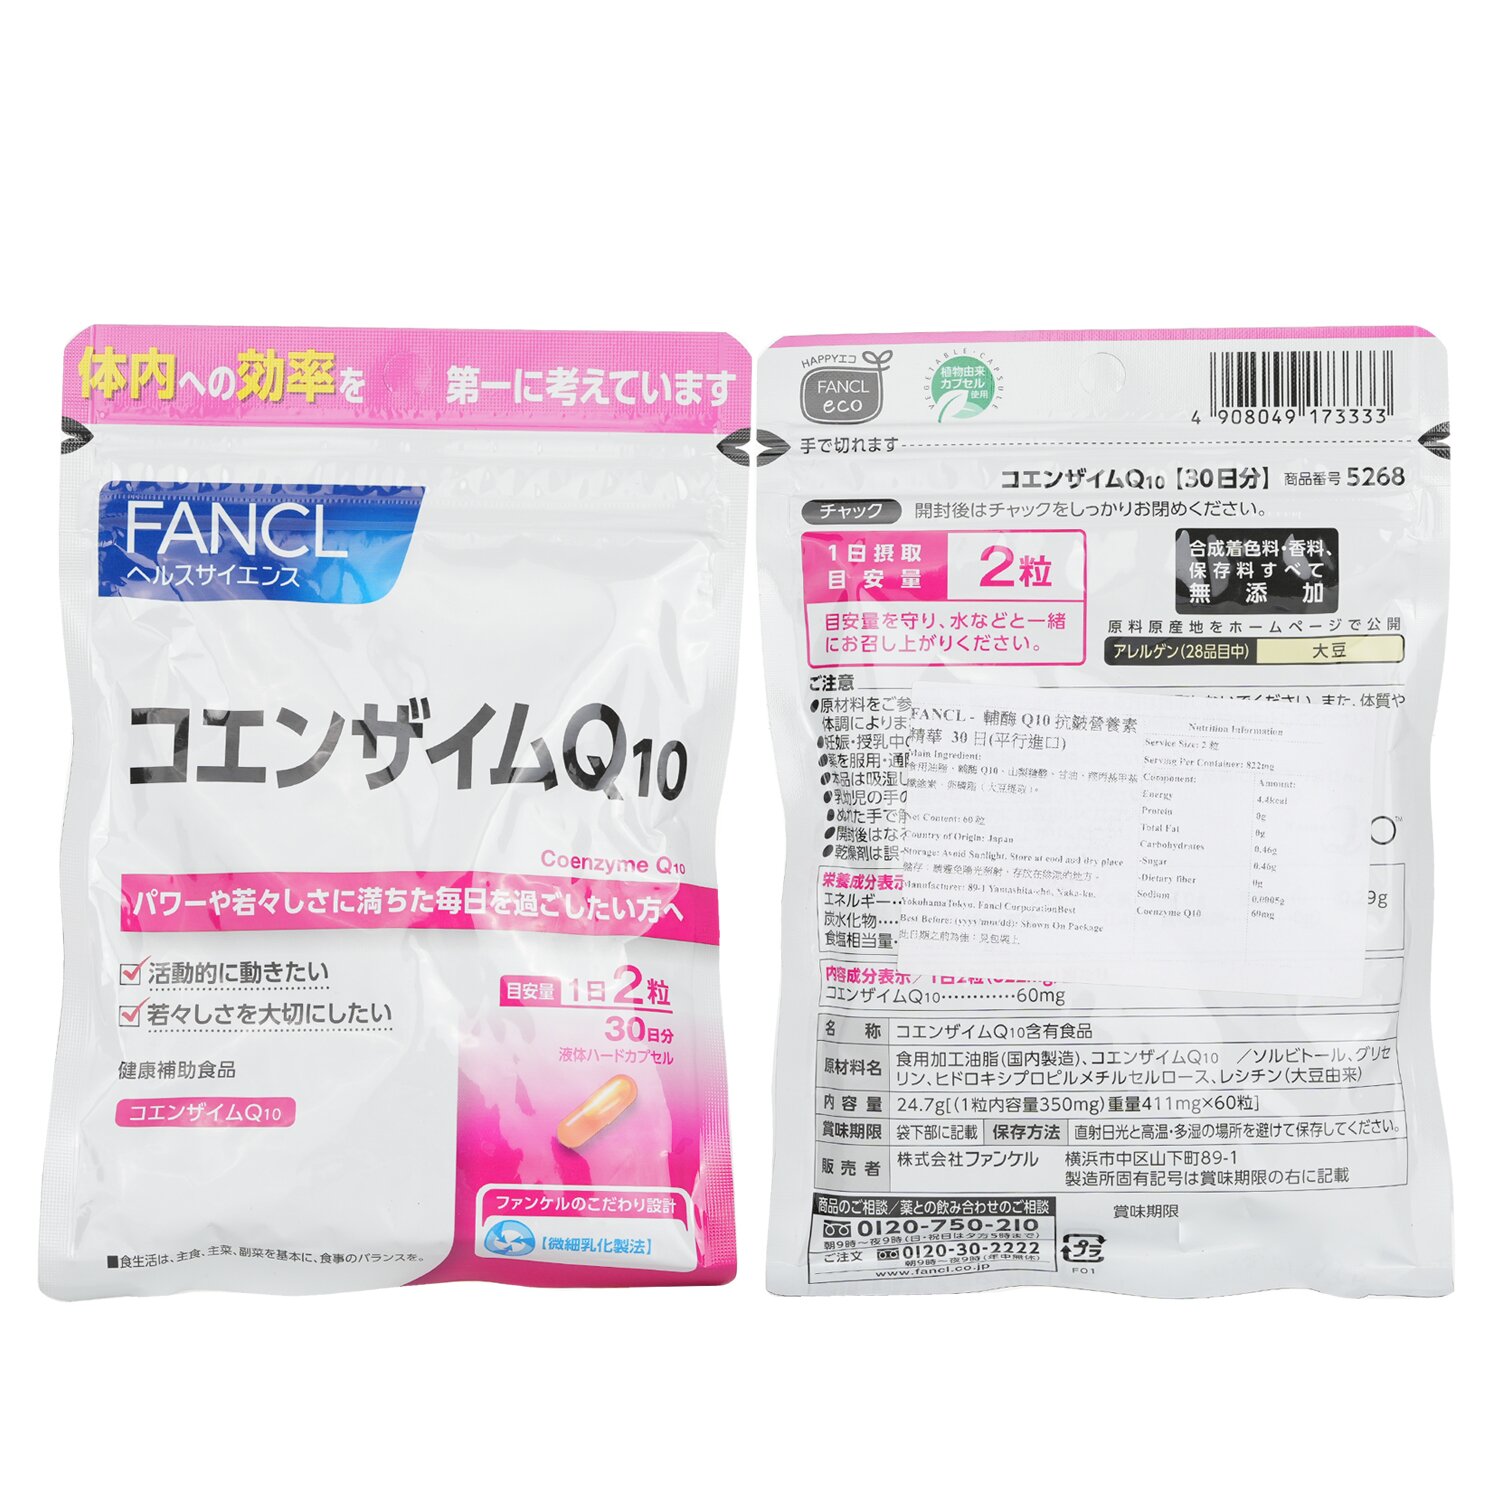 Fancl Coenzyme Q10 Supplement 60 tablets [Parallel Import Good] 60capsules